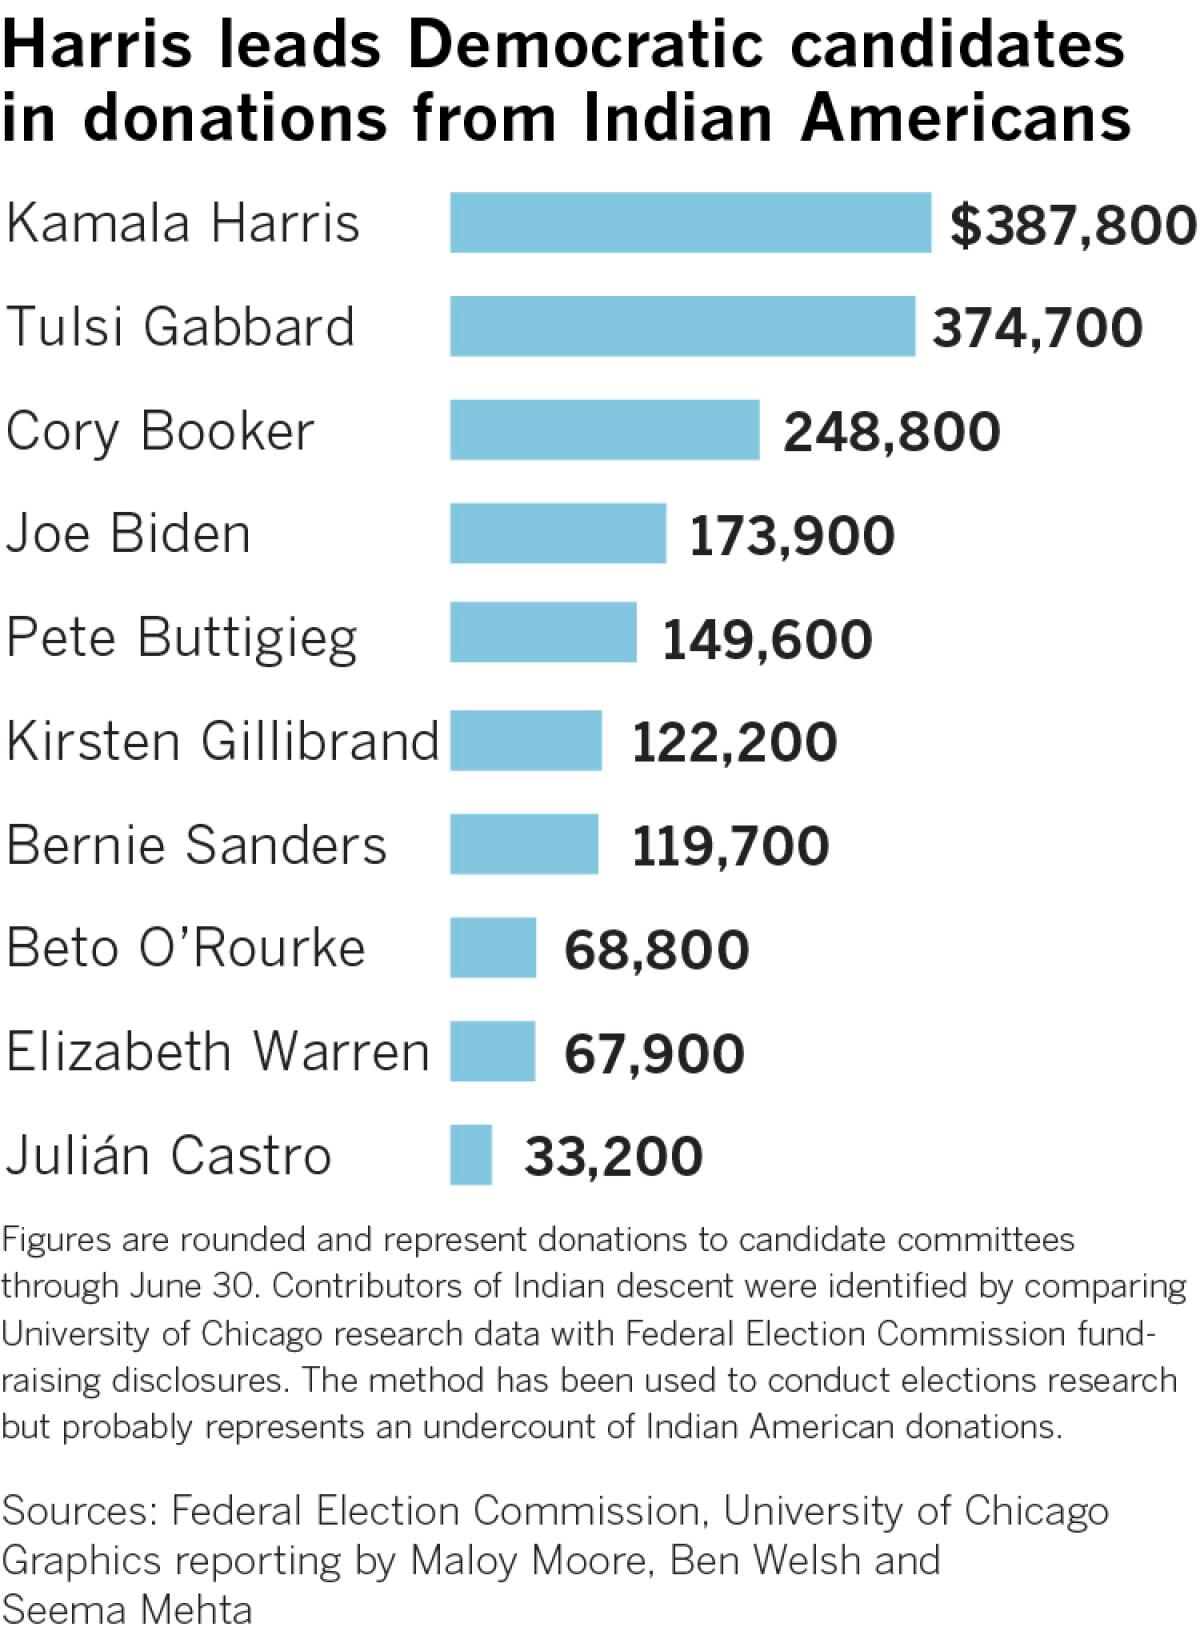 Chart showing money raised by Democratic presidential candidates from Indian American donors